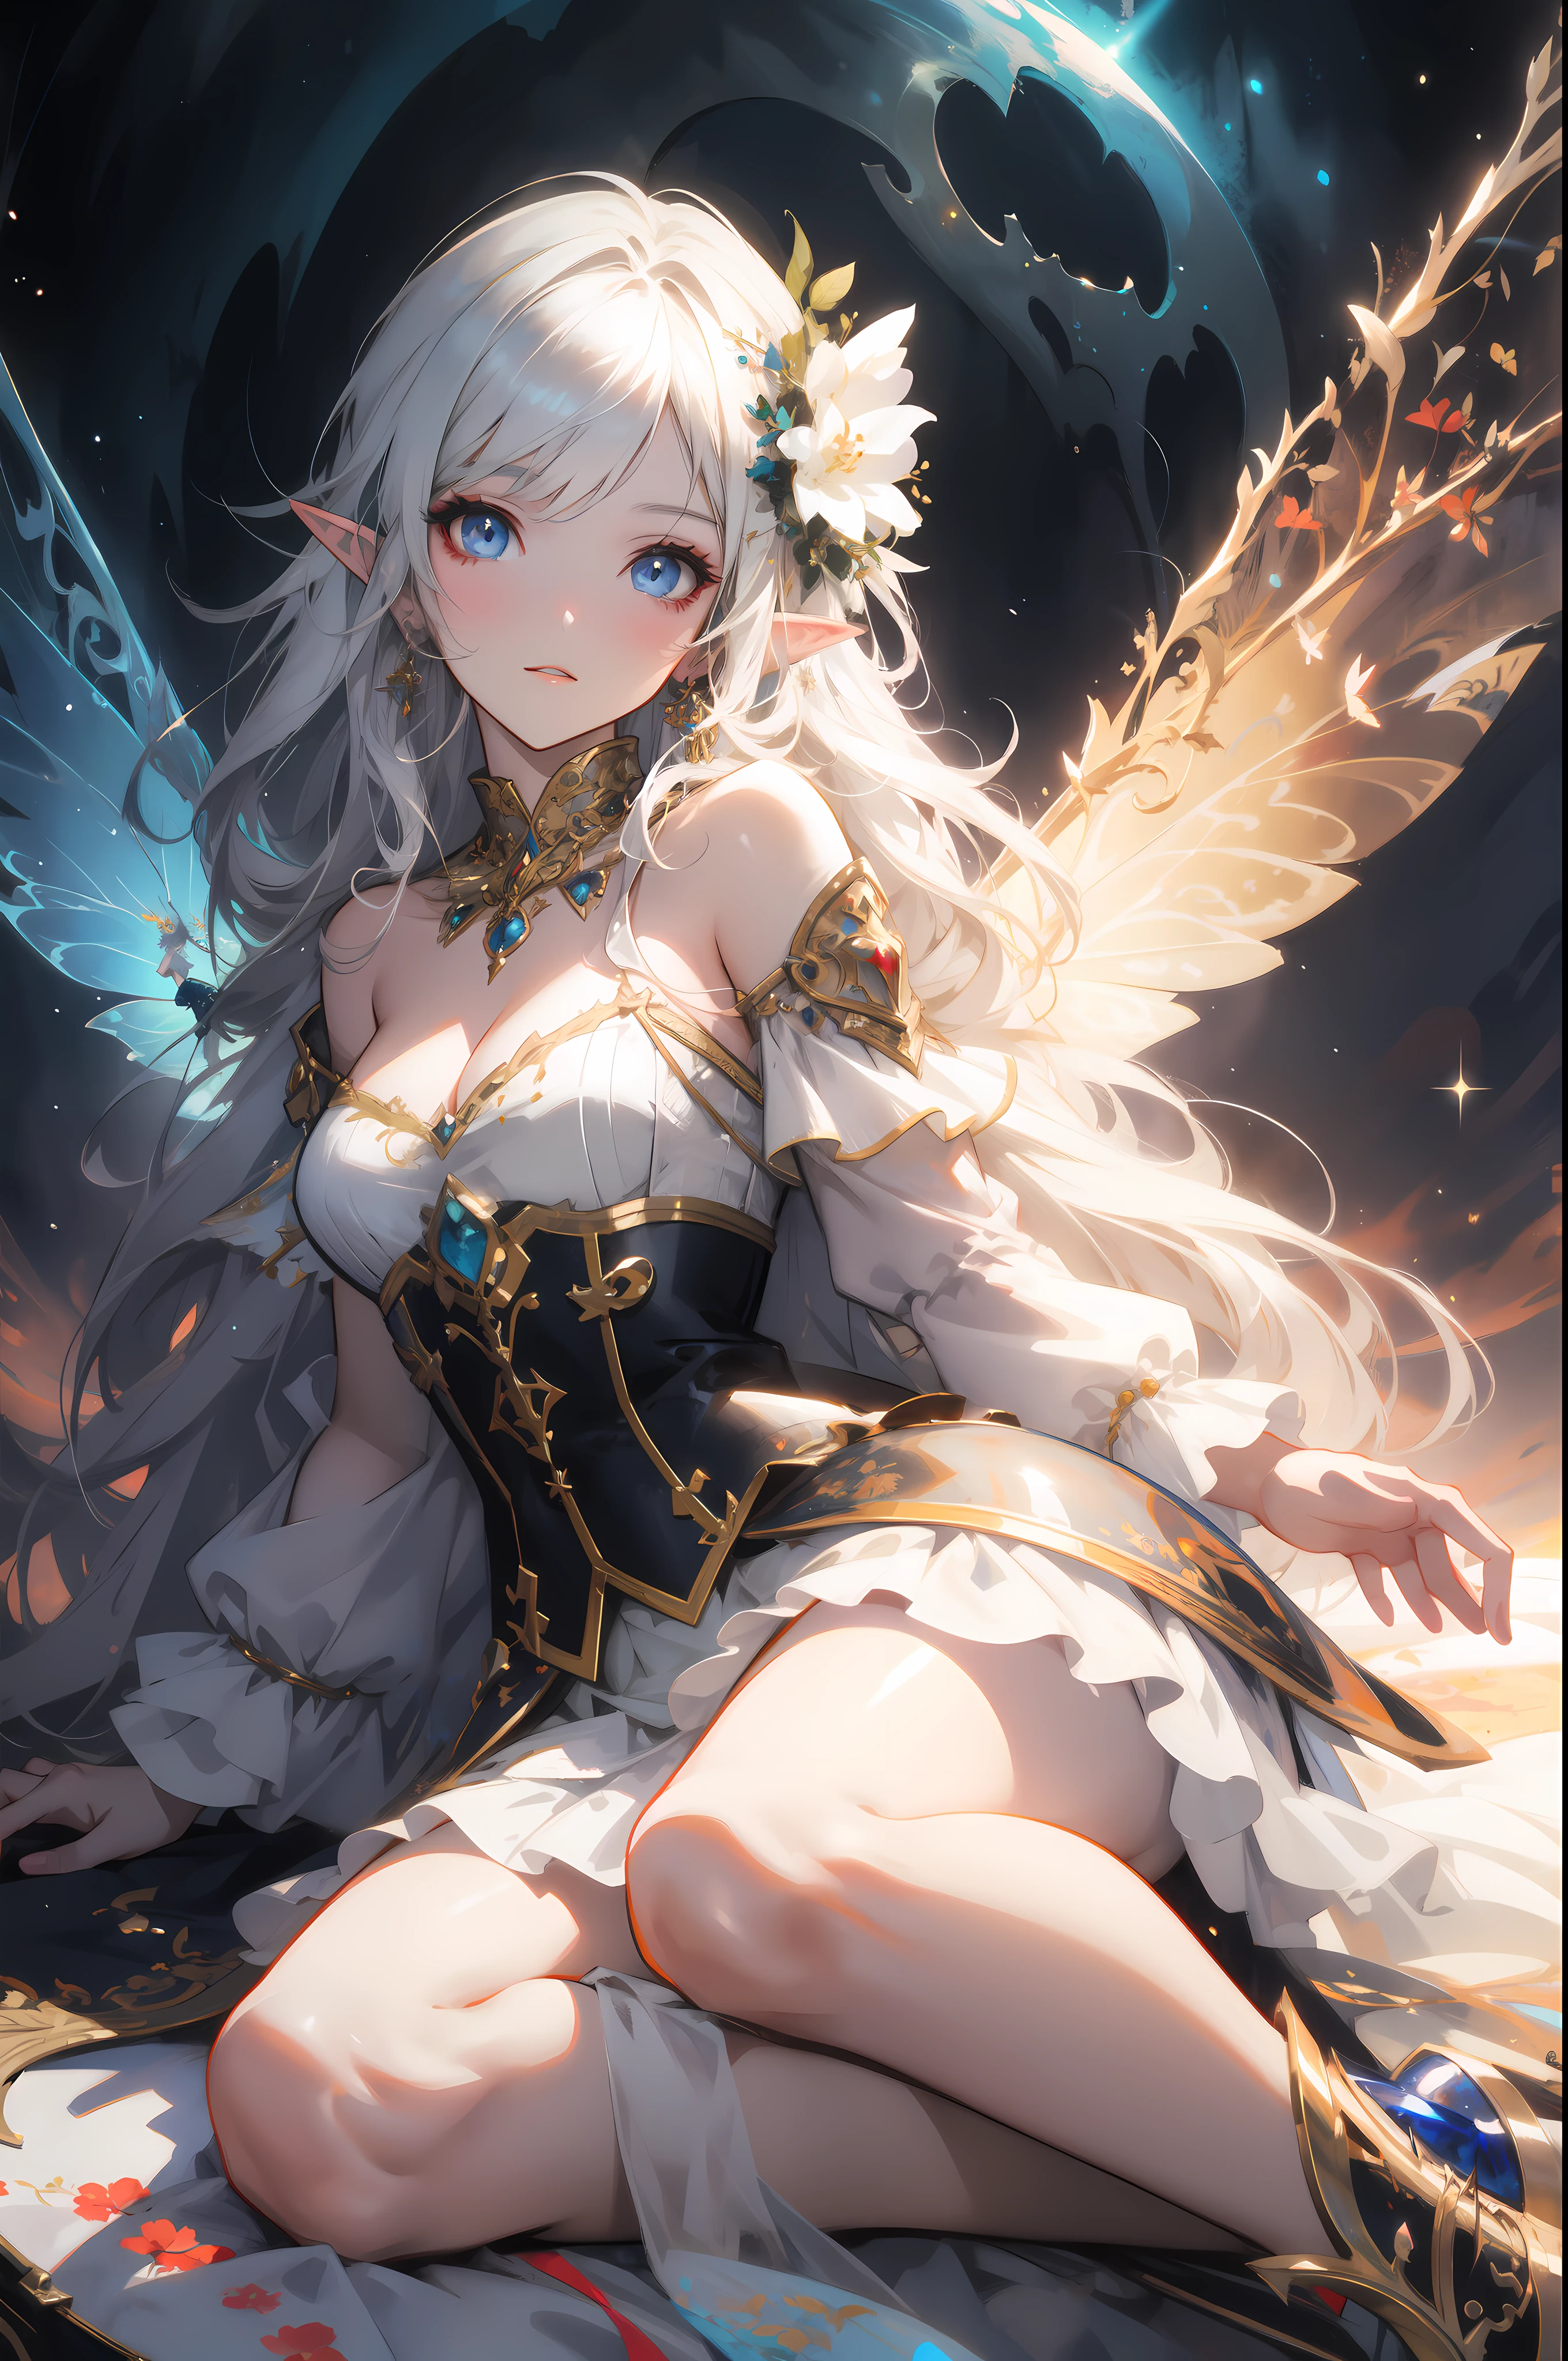 Elf queen with white hair and wings sitting on bed, fantasy artwork, portrait of a fairy, portrait of fairy, Anime fantasy illustration, 2. 5 D CGI anime fantasy artwork, beautiful fantasy anime, Fantasy art style, Guweiz in Pixiv ArtStation, Beautiful fairy, 8K high quality detailed art, astral fairy, Fanart Meilleure ArtStation